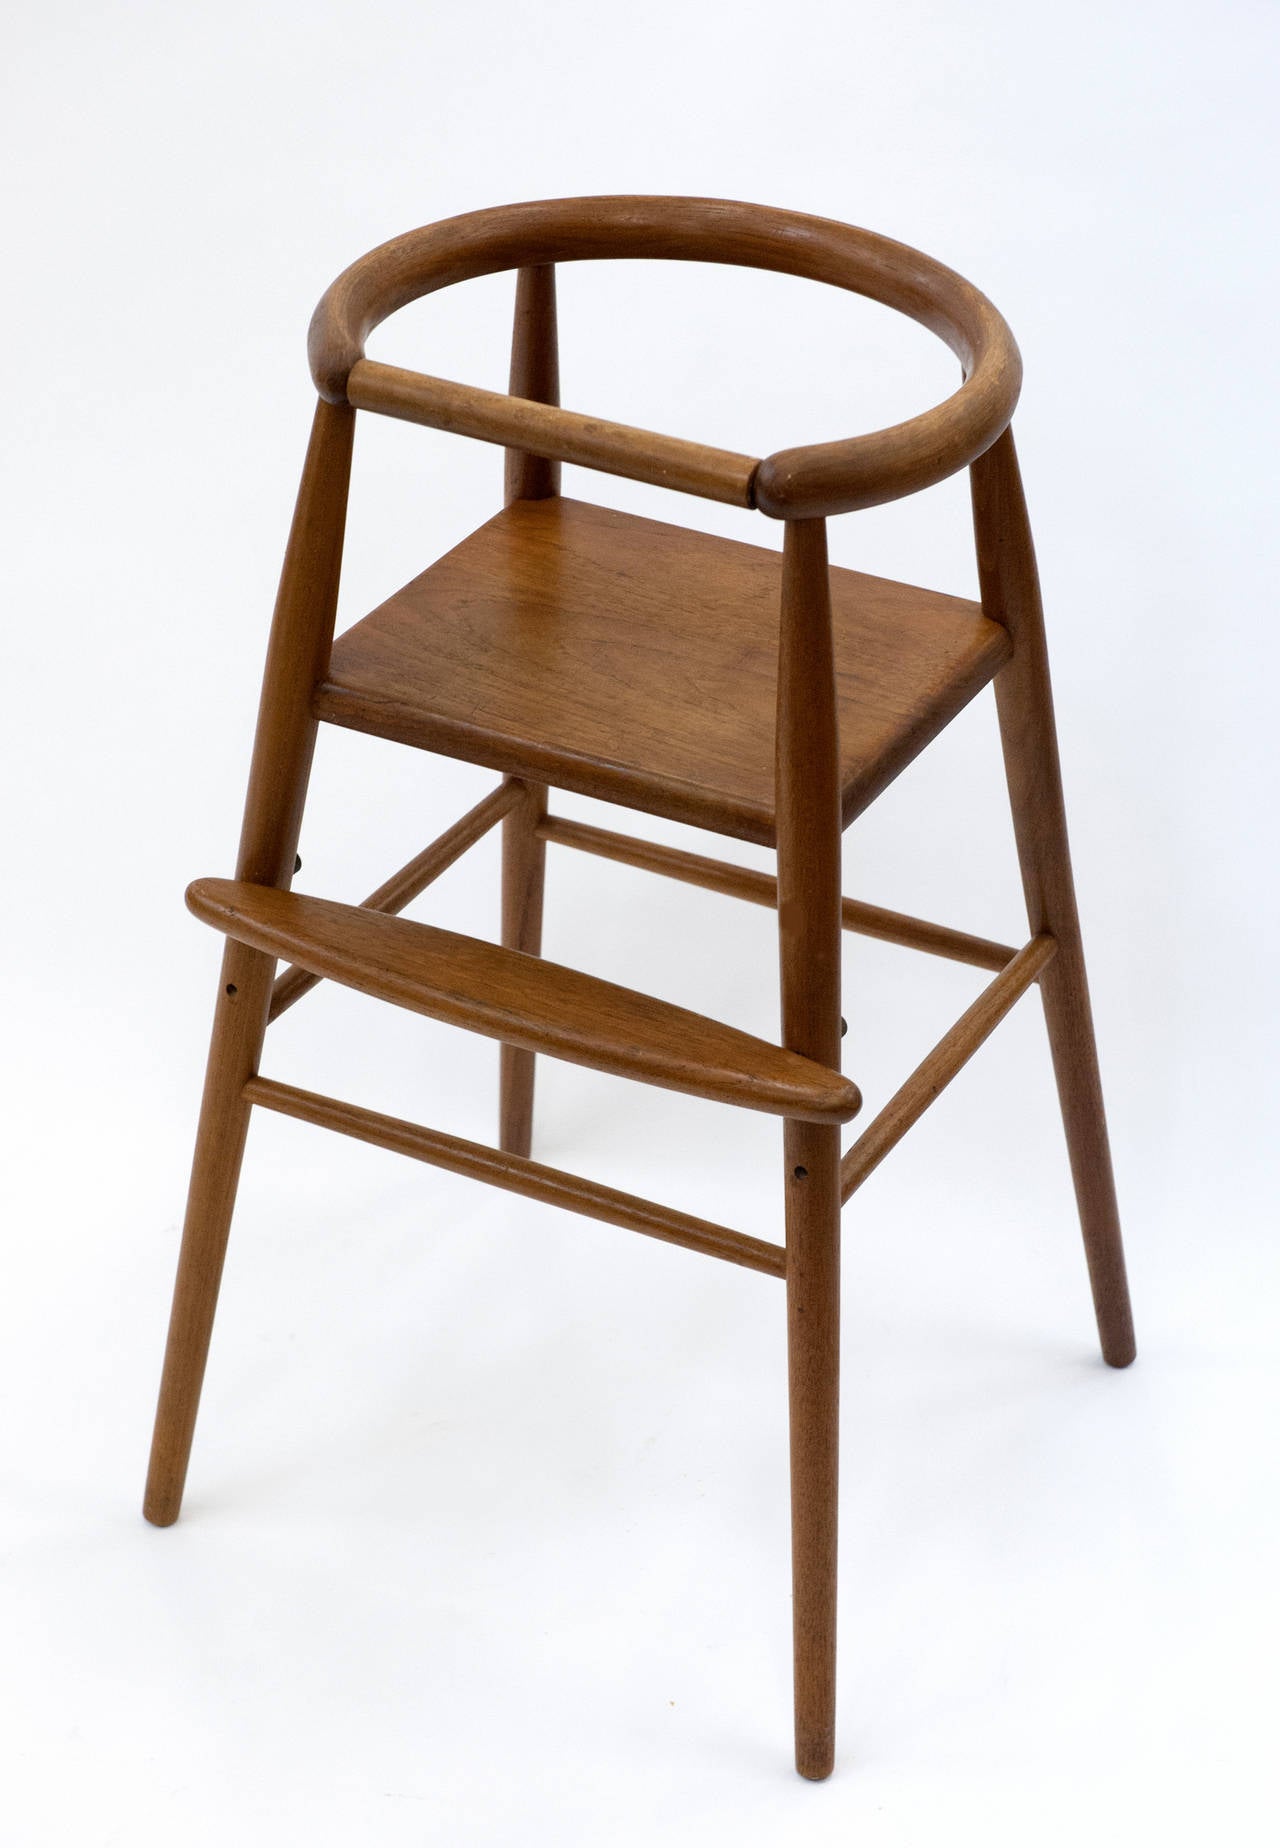 Beautifully designed and constructed high chair by Nanna Ditzel.  Made from solid teak with adjustable foot rest.